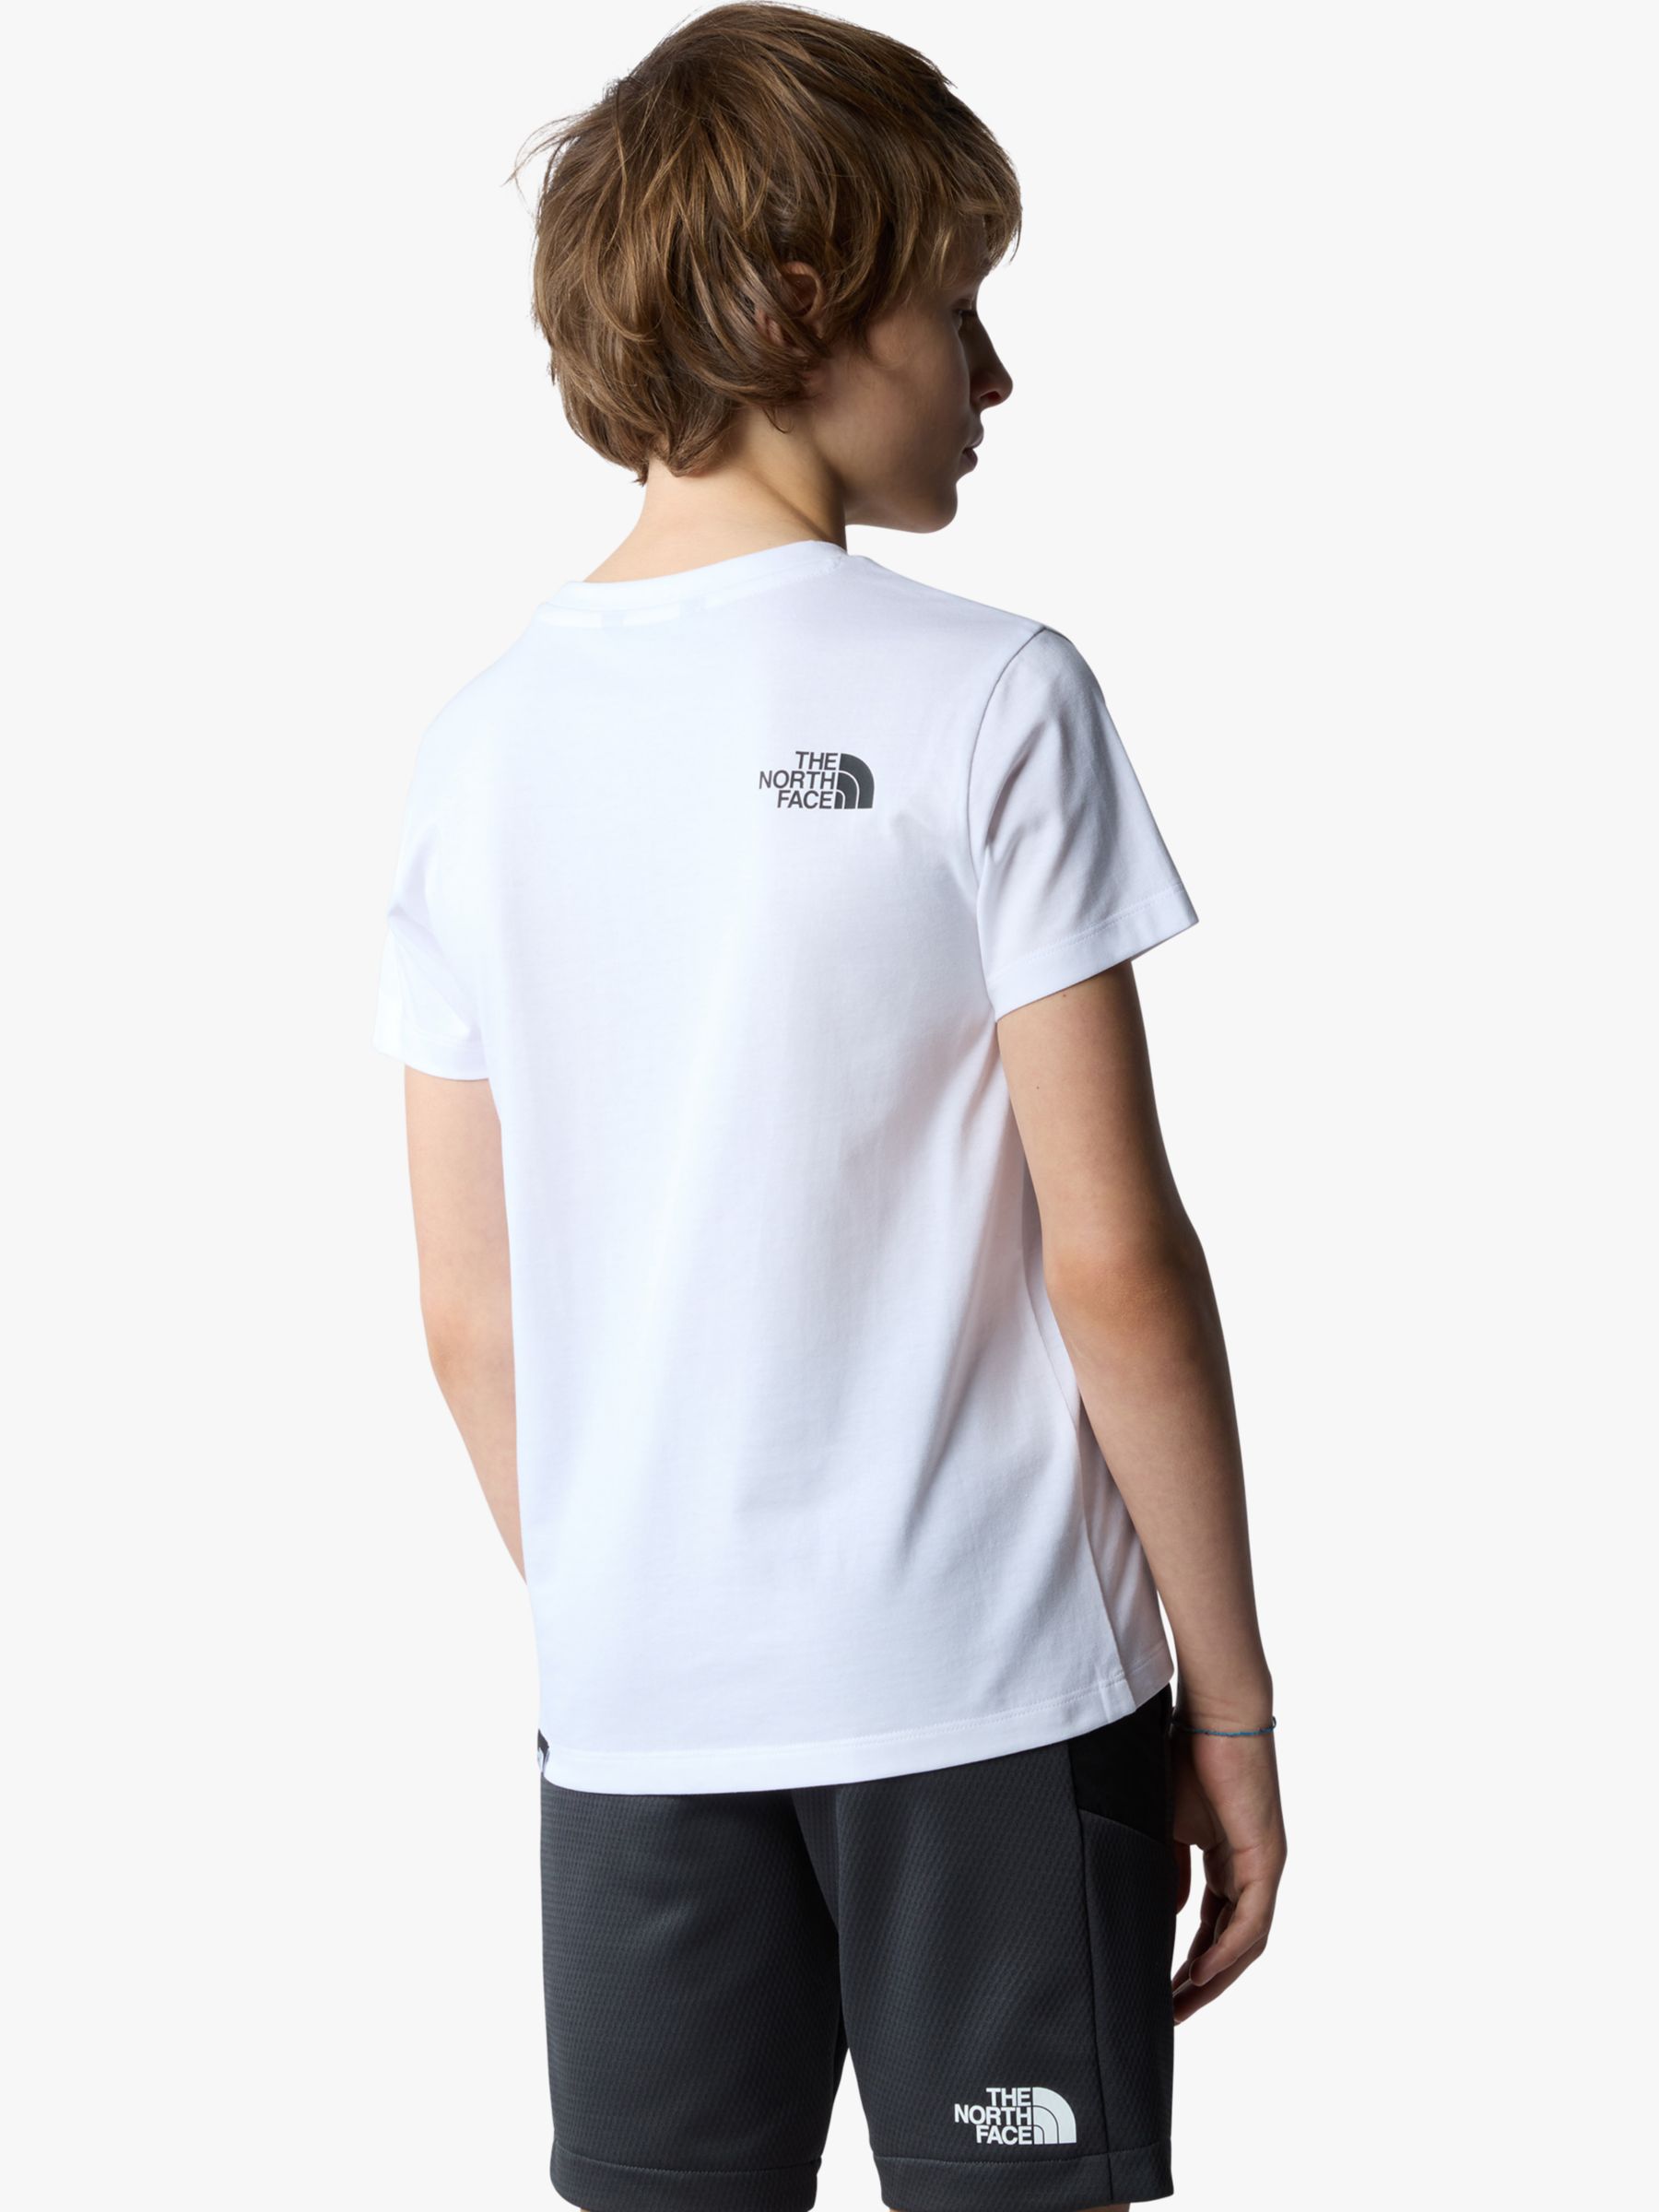 The North Face Kids' Easy Logo Short Sleeve T-Shirt, White, XL